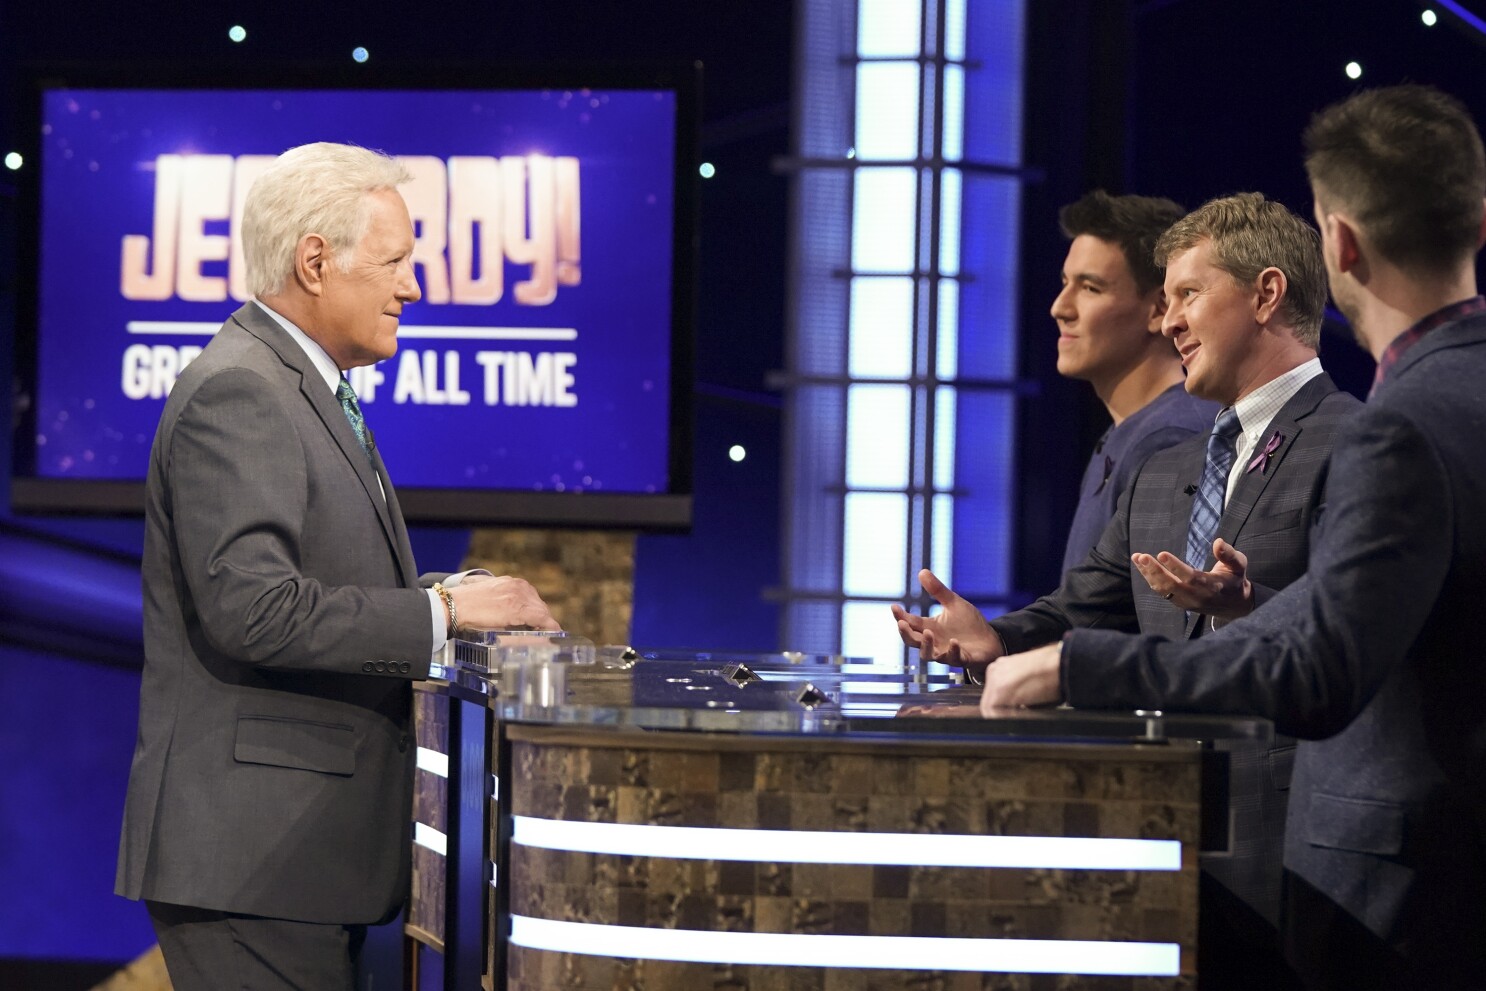 Ken Jennings Keeps His Cool To Win Jeopardy Greatest Of All Time